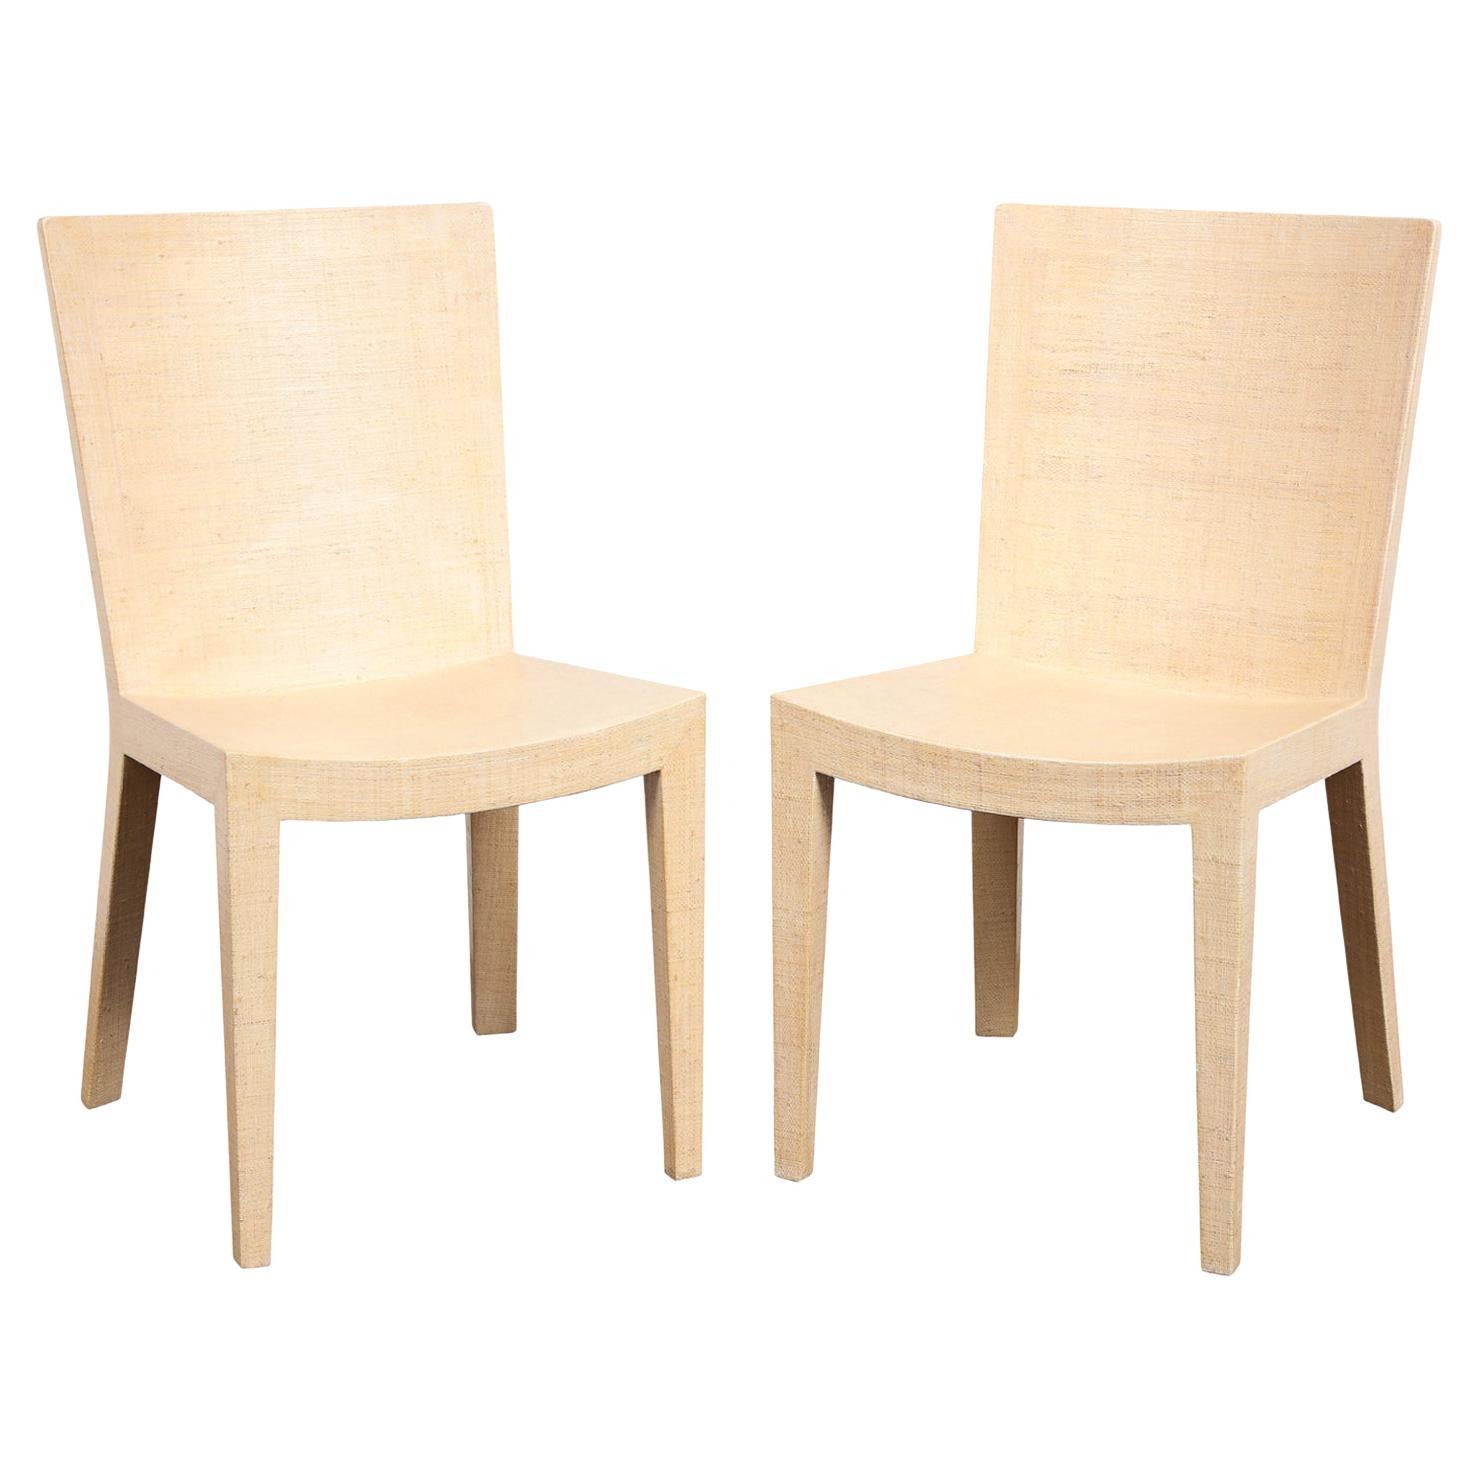 Karl Springer Pair of "JMF Chairs" in Lacquered Raffia 1993 'Signed' For Sale